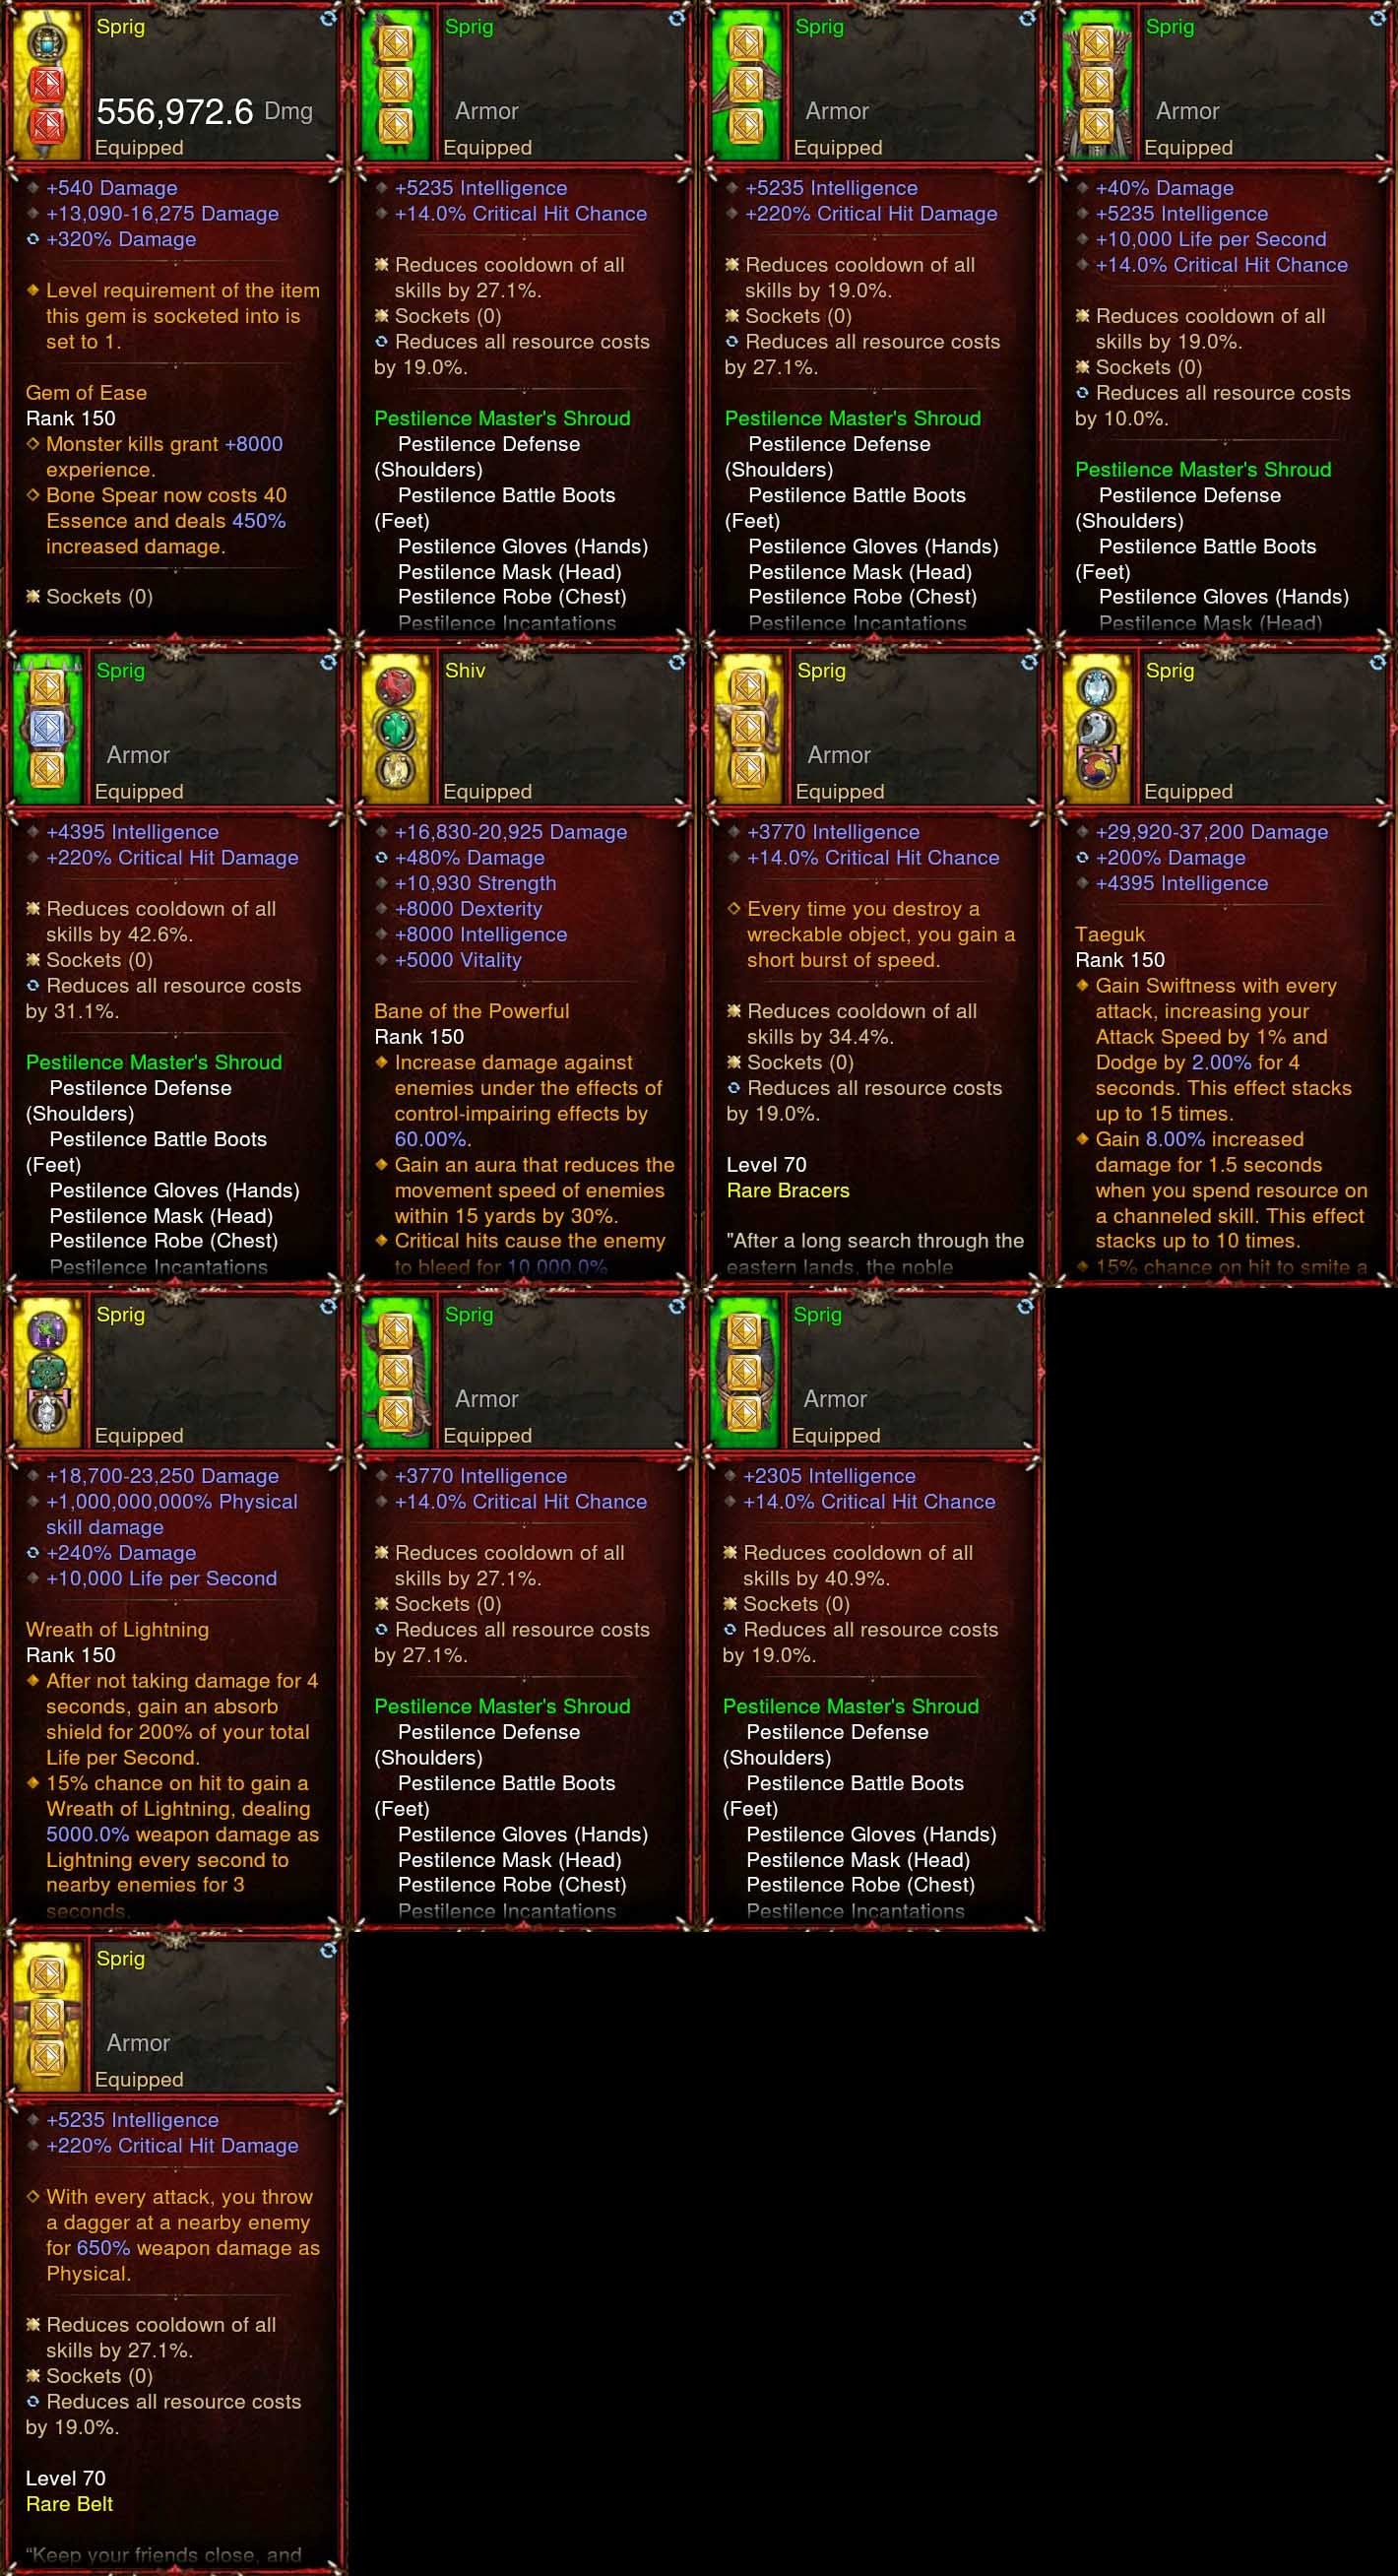 [Primal Ancient] Diablo 3 Immortal v5 Type-R Sprig Modded Necromancer Pestilence Set Diablo 3 Mods ROS Seasonal and Non Seasonal Save Mod - Modded Items and Gear - Hacks - Cheats - Trainers for Playstation 4 - Playstation 5 - Nintendo Switch - Xbox One